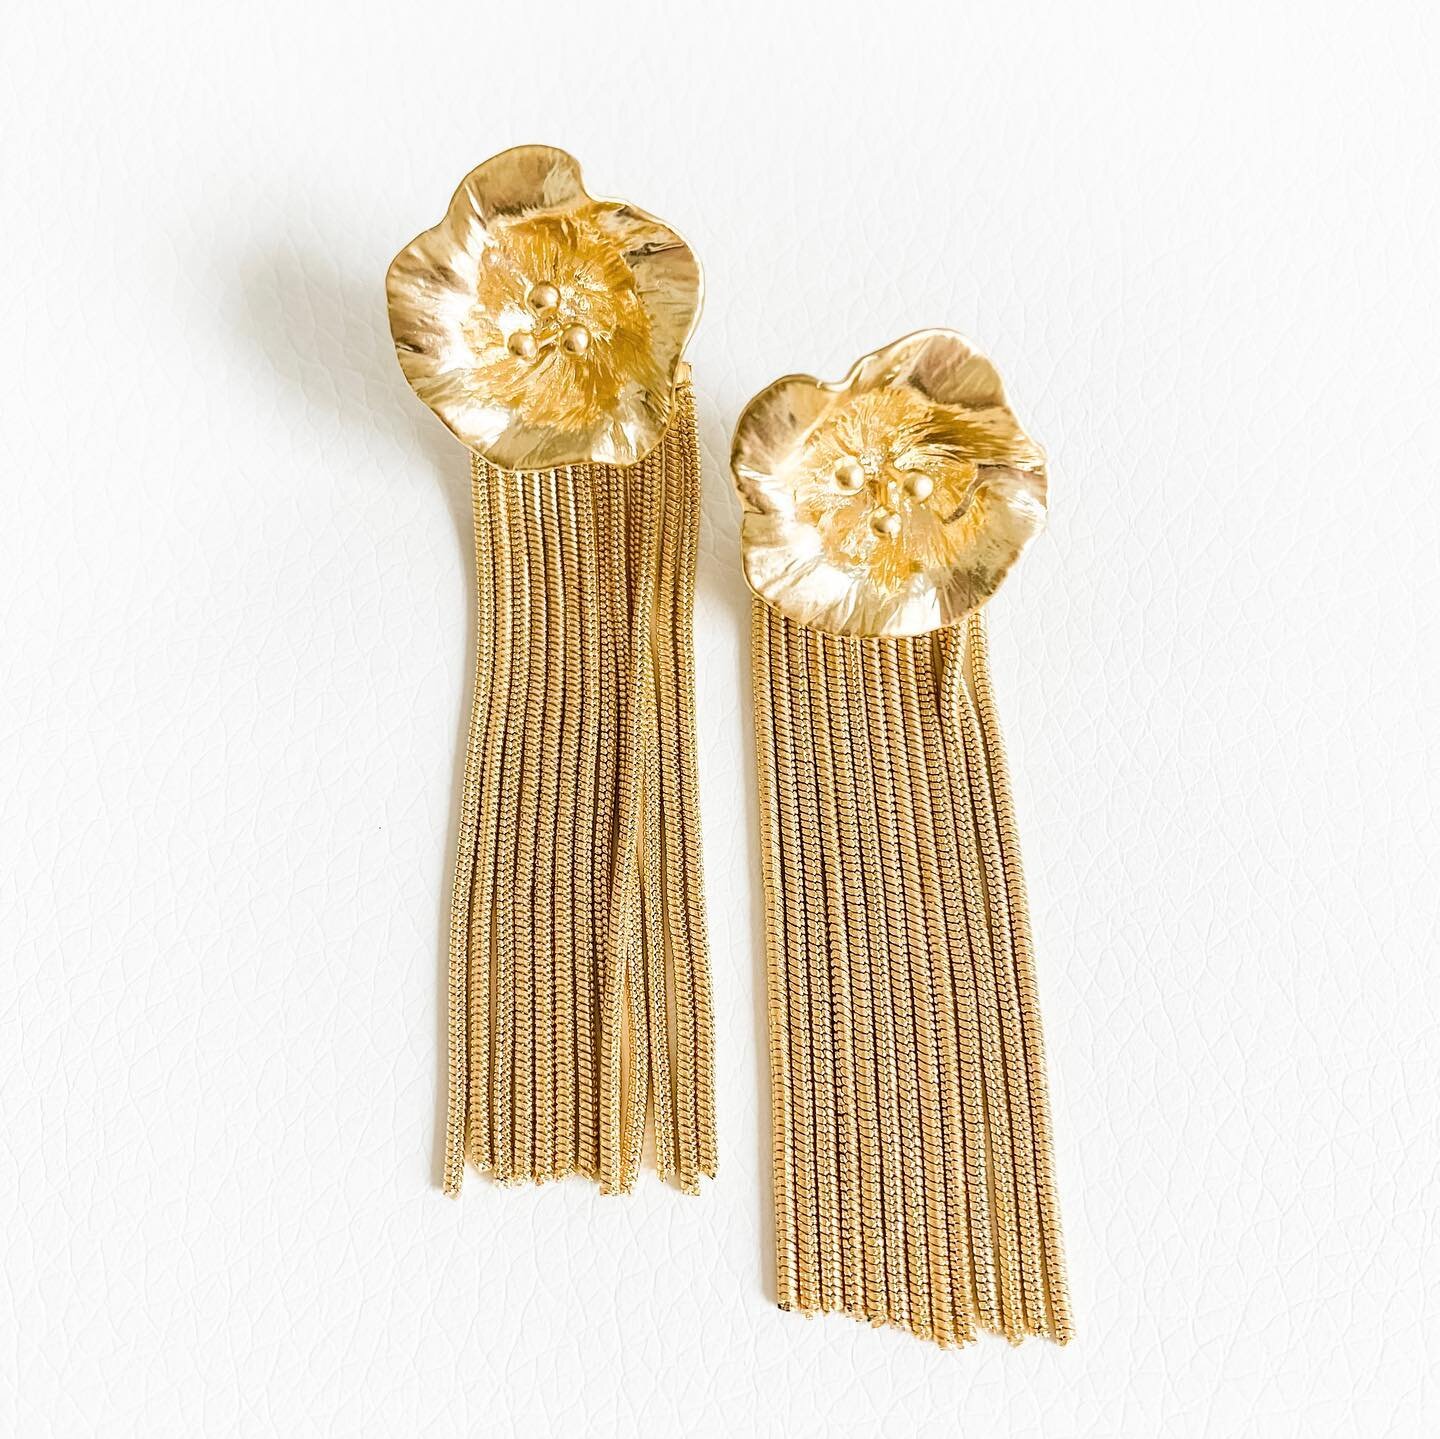 floral fringe earrings 🌼 are the perfect accessory for your spring wardrobe 

#catherinethomsjewelry #springfashion #floralearrings #fringeearrings